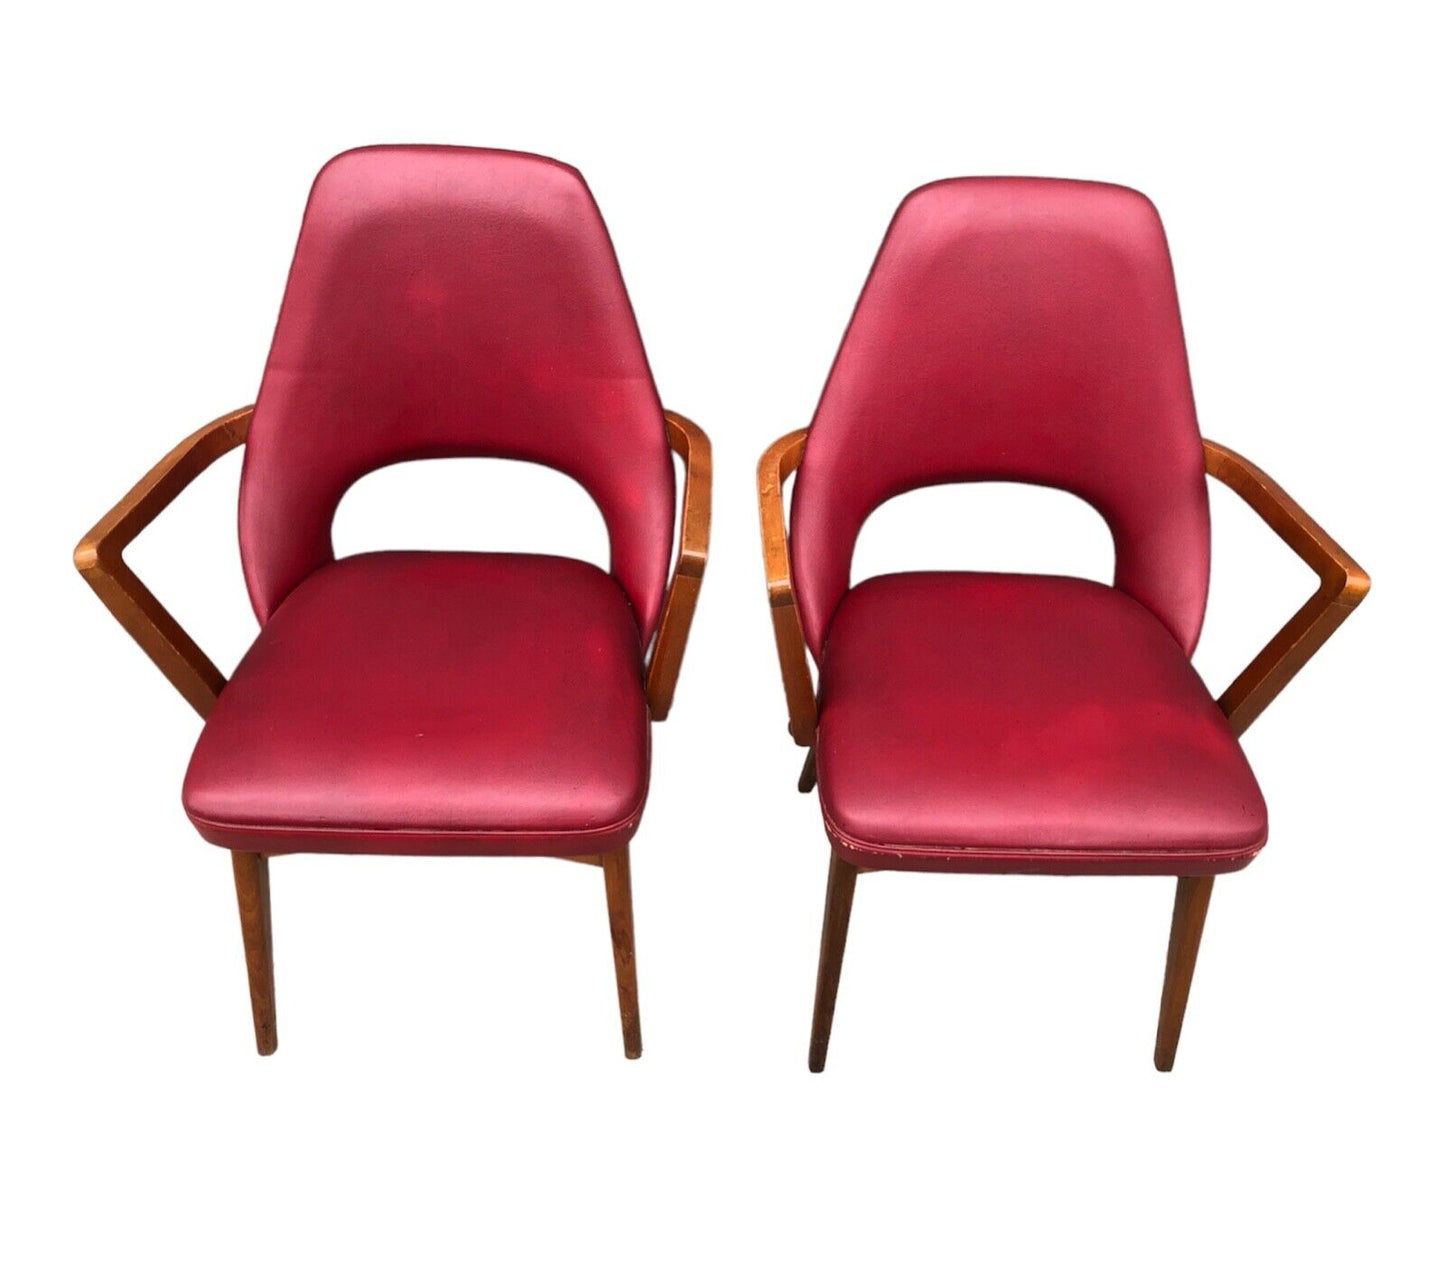 000907....Handsome Pair Of Ben Armchairs / Mid Century Modern Chairs ( sold )